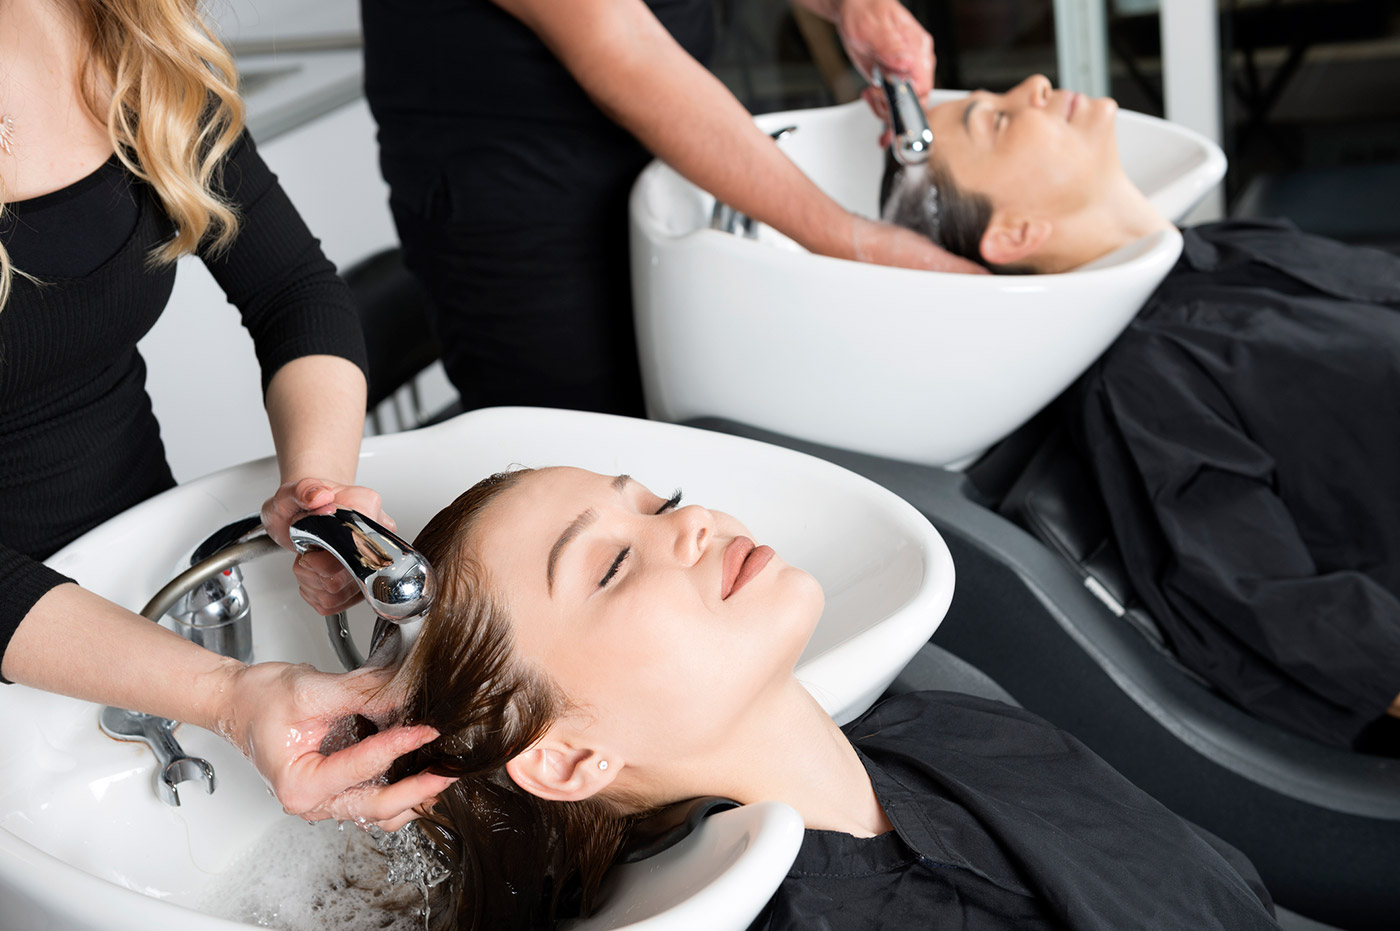 Two women getting their hair shampooed by hairdressers.